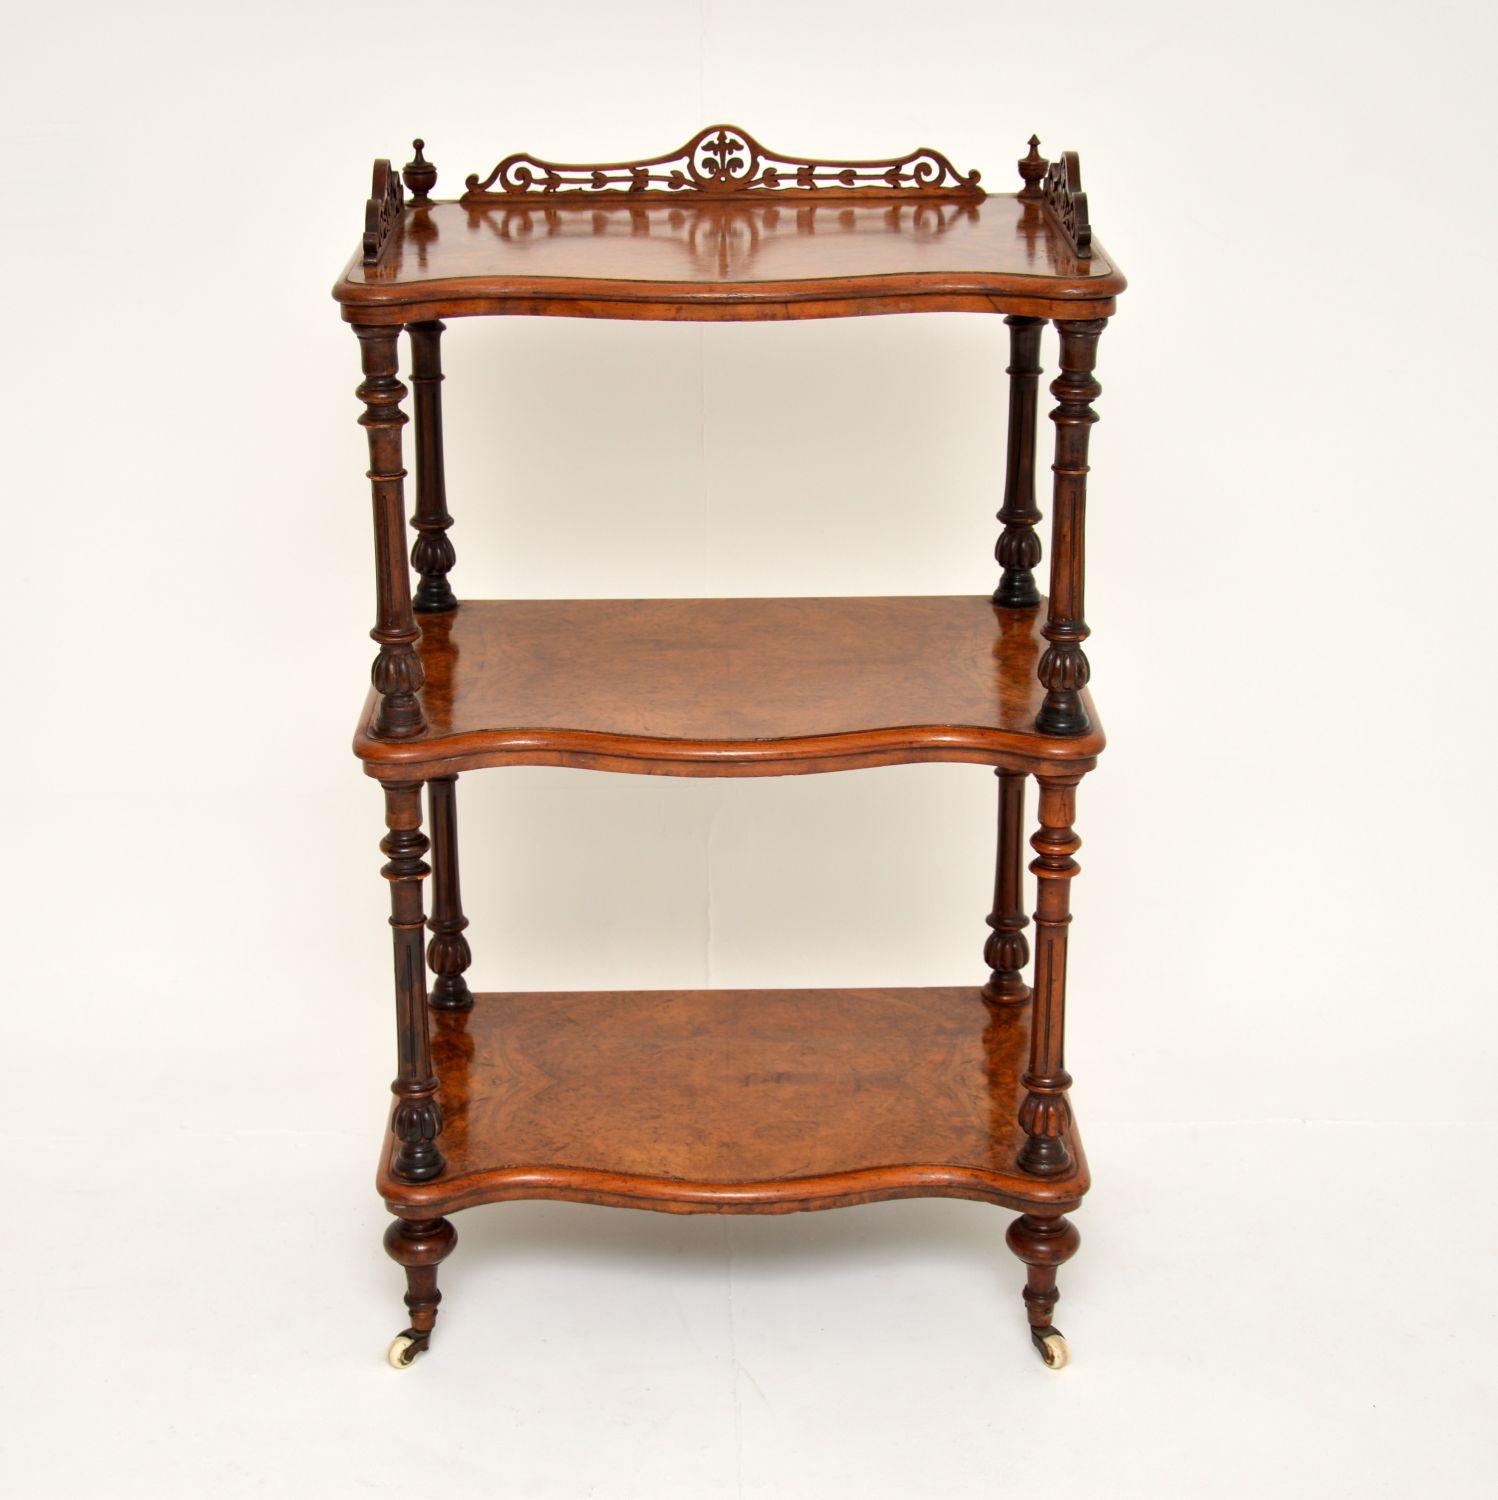 A gorgeous antique Victorian period What-Not stand in burr walnut. This was made in England, it dates from around the 1860’s.

The quality is fantastic, it is a very useful and sturdy item. There are stunning burr walnut grain patterns, the legs